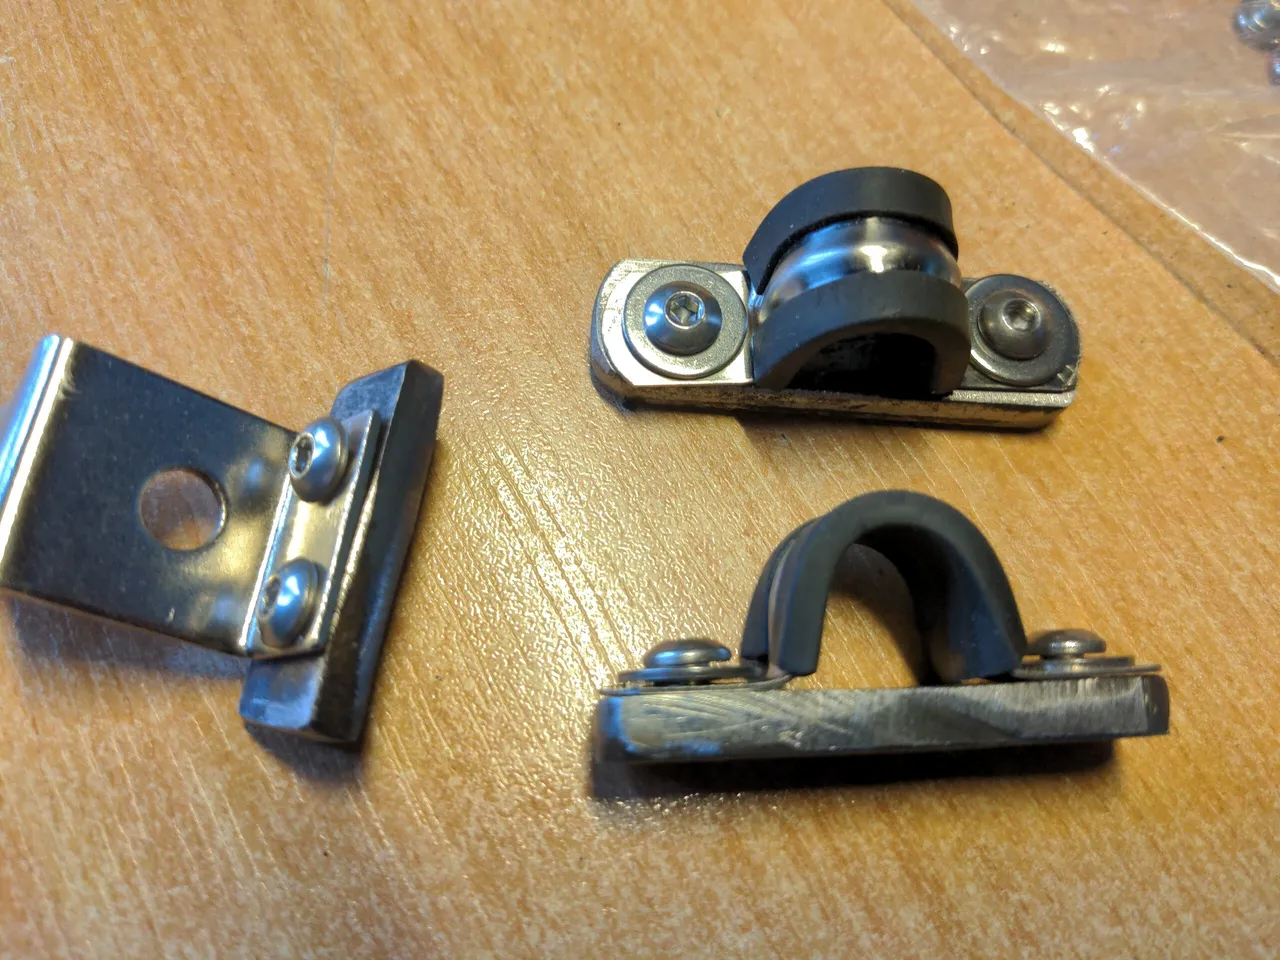 Some pieces of steel, about 5mm thick. Two of them have omega-shaped hose clamps bolted into them, and the other has a small stainless steel metal bracket attached to it.